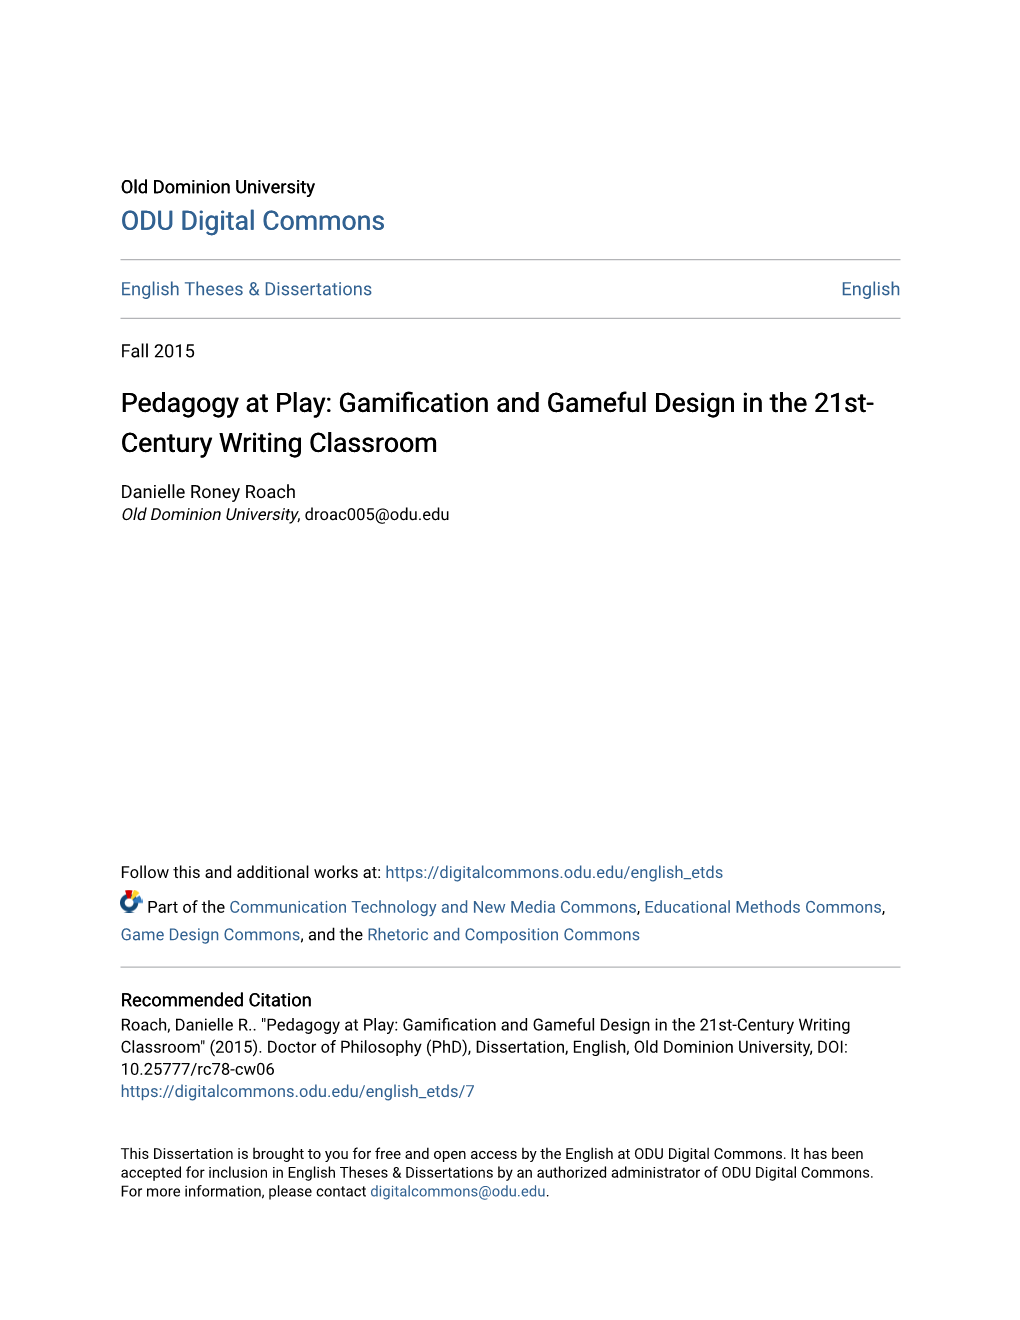 Pedagogy at Play: Gamification and Gameful Design in the 21St-Century Writing Classroom" (2015)